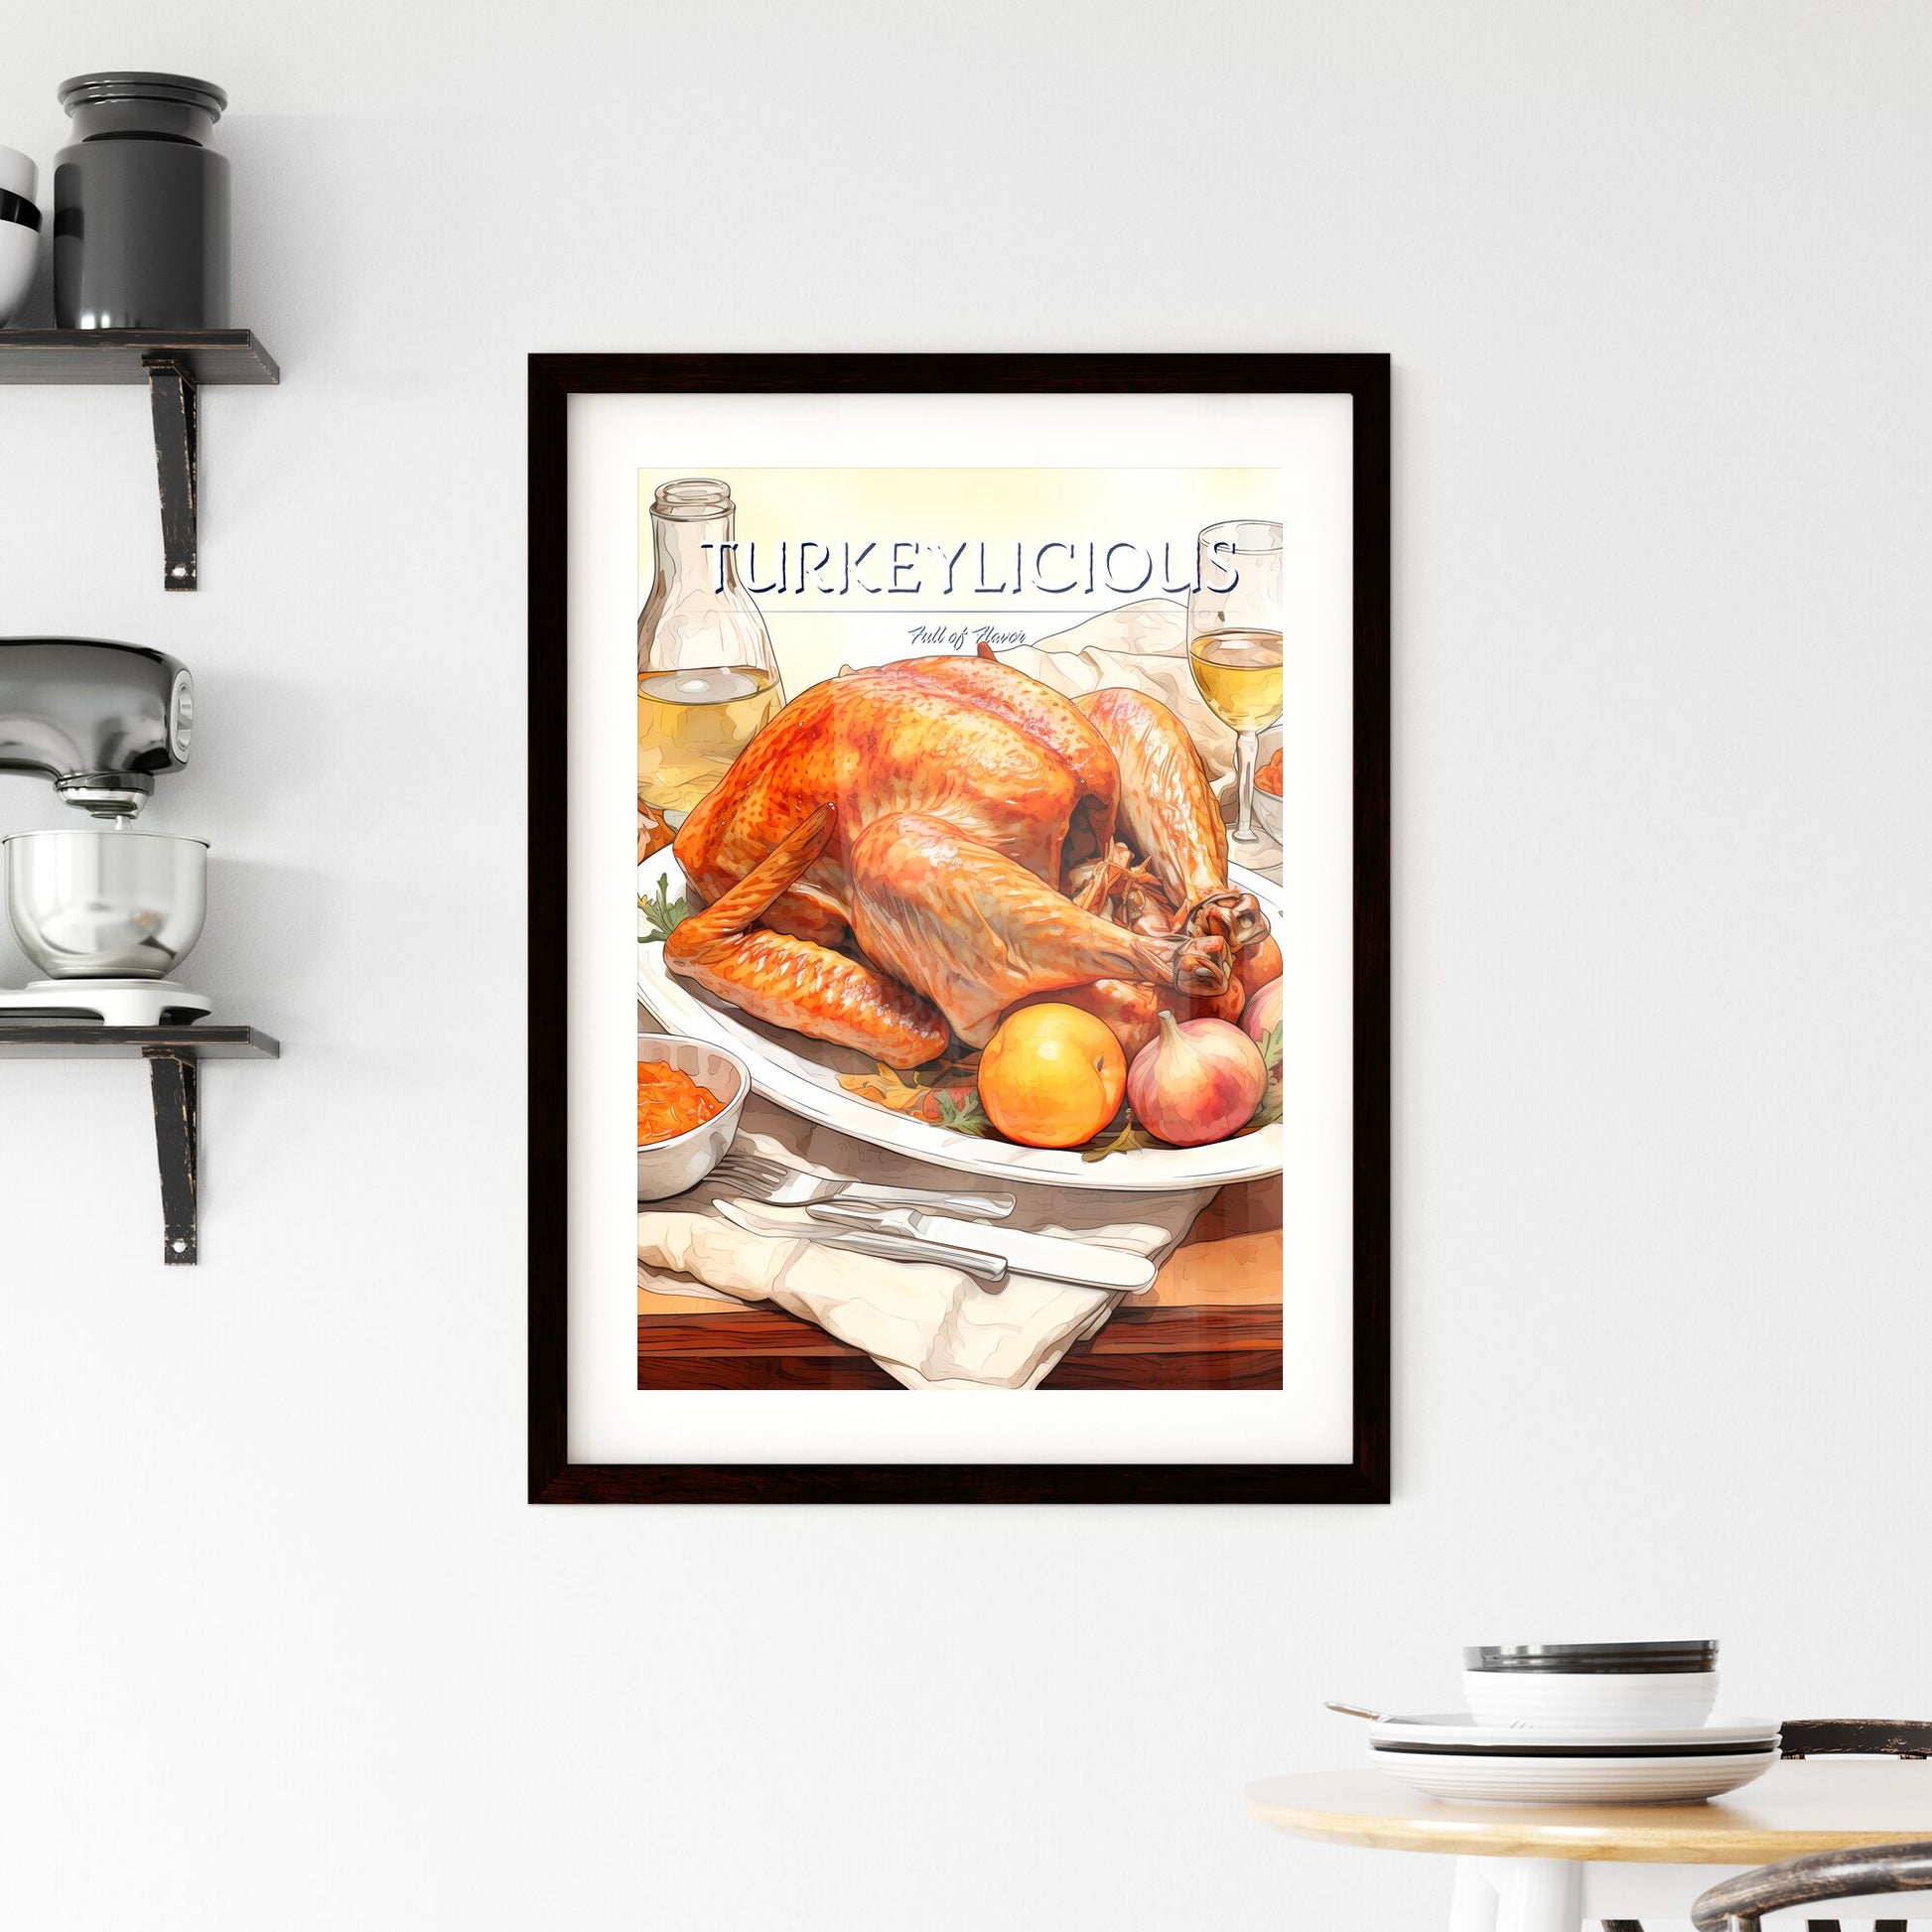 A Poster of Thanksgiving turkey - A Turkey On A Platter With Fruit And Sauces Default Title